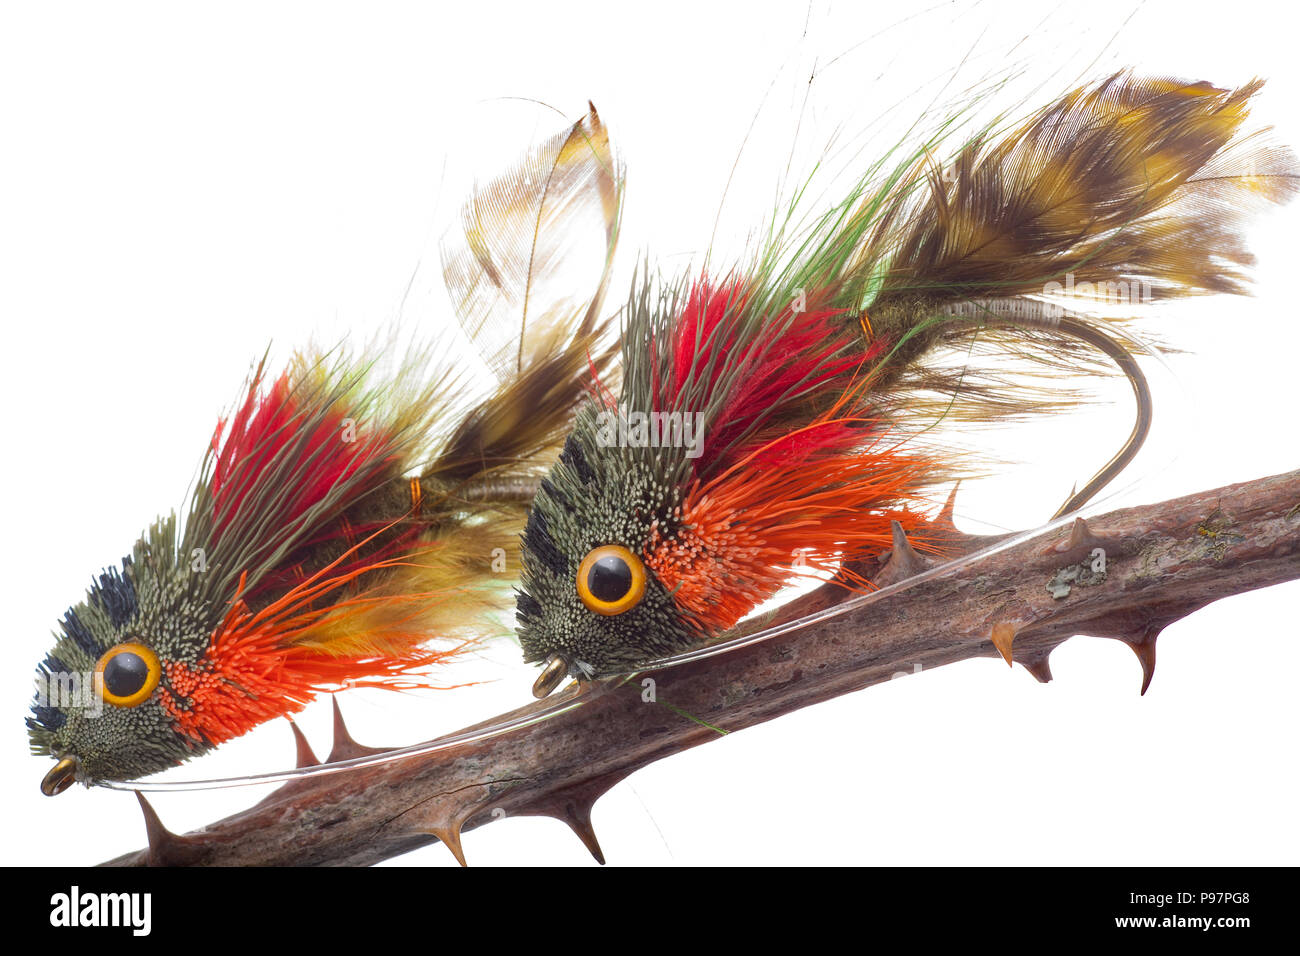 Fly fishing lure making Cut Out Stock Images & Pictures - Alamy